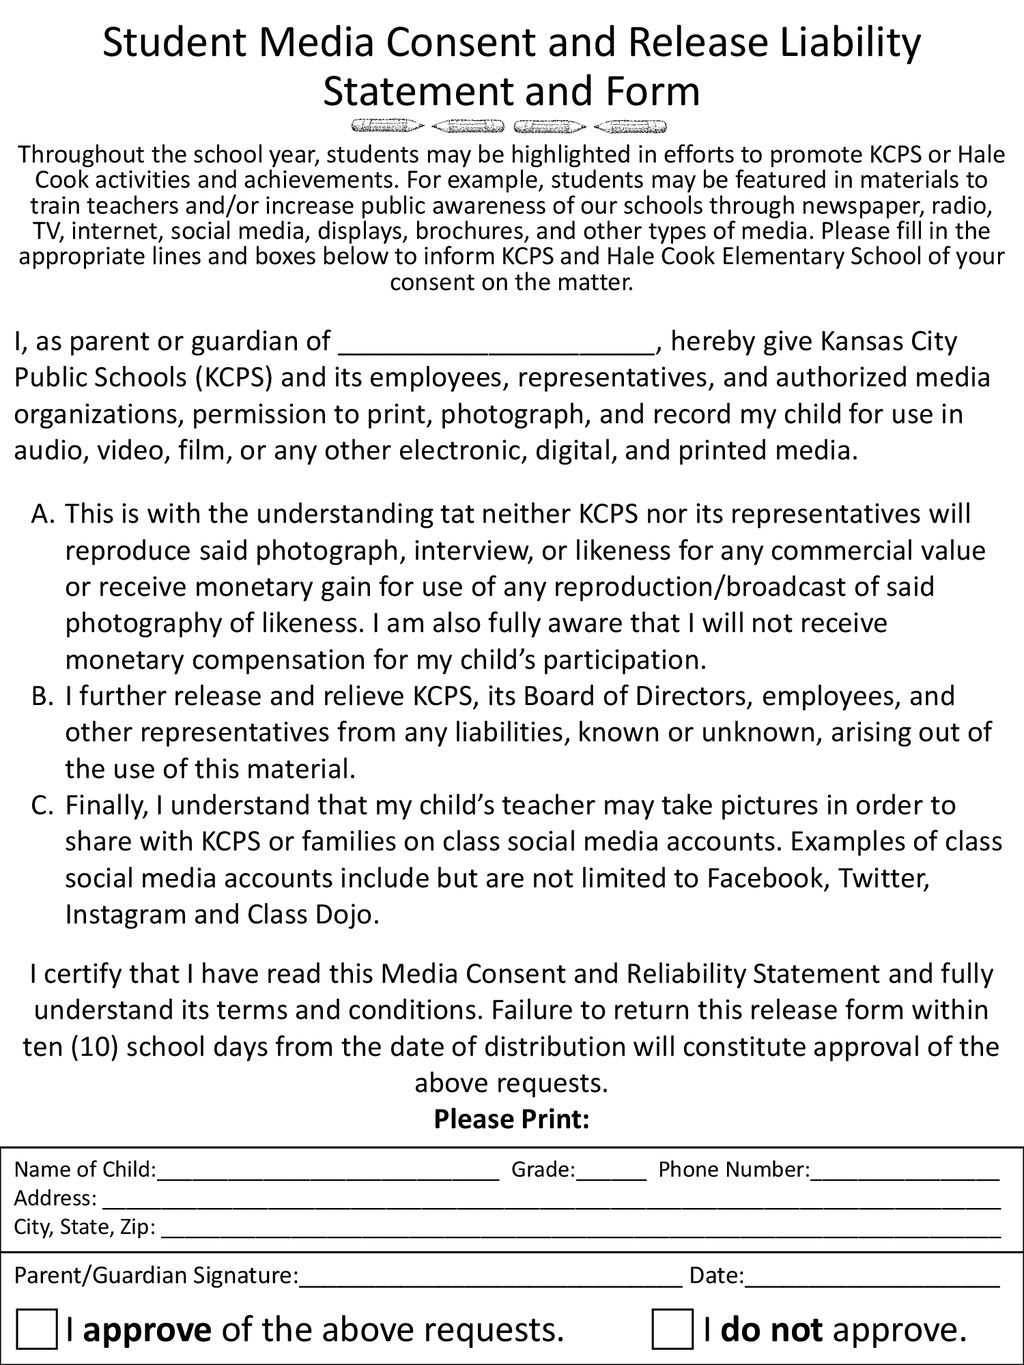 Student Media Consent And Release Liability Statement And Form Ppt Download